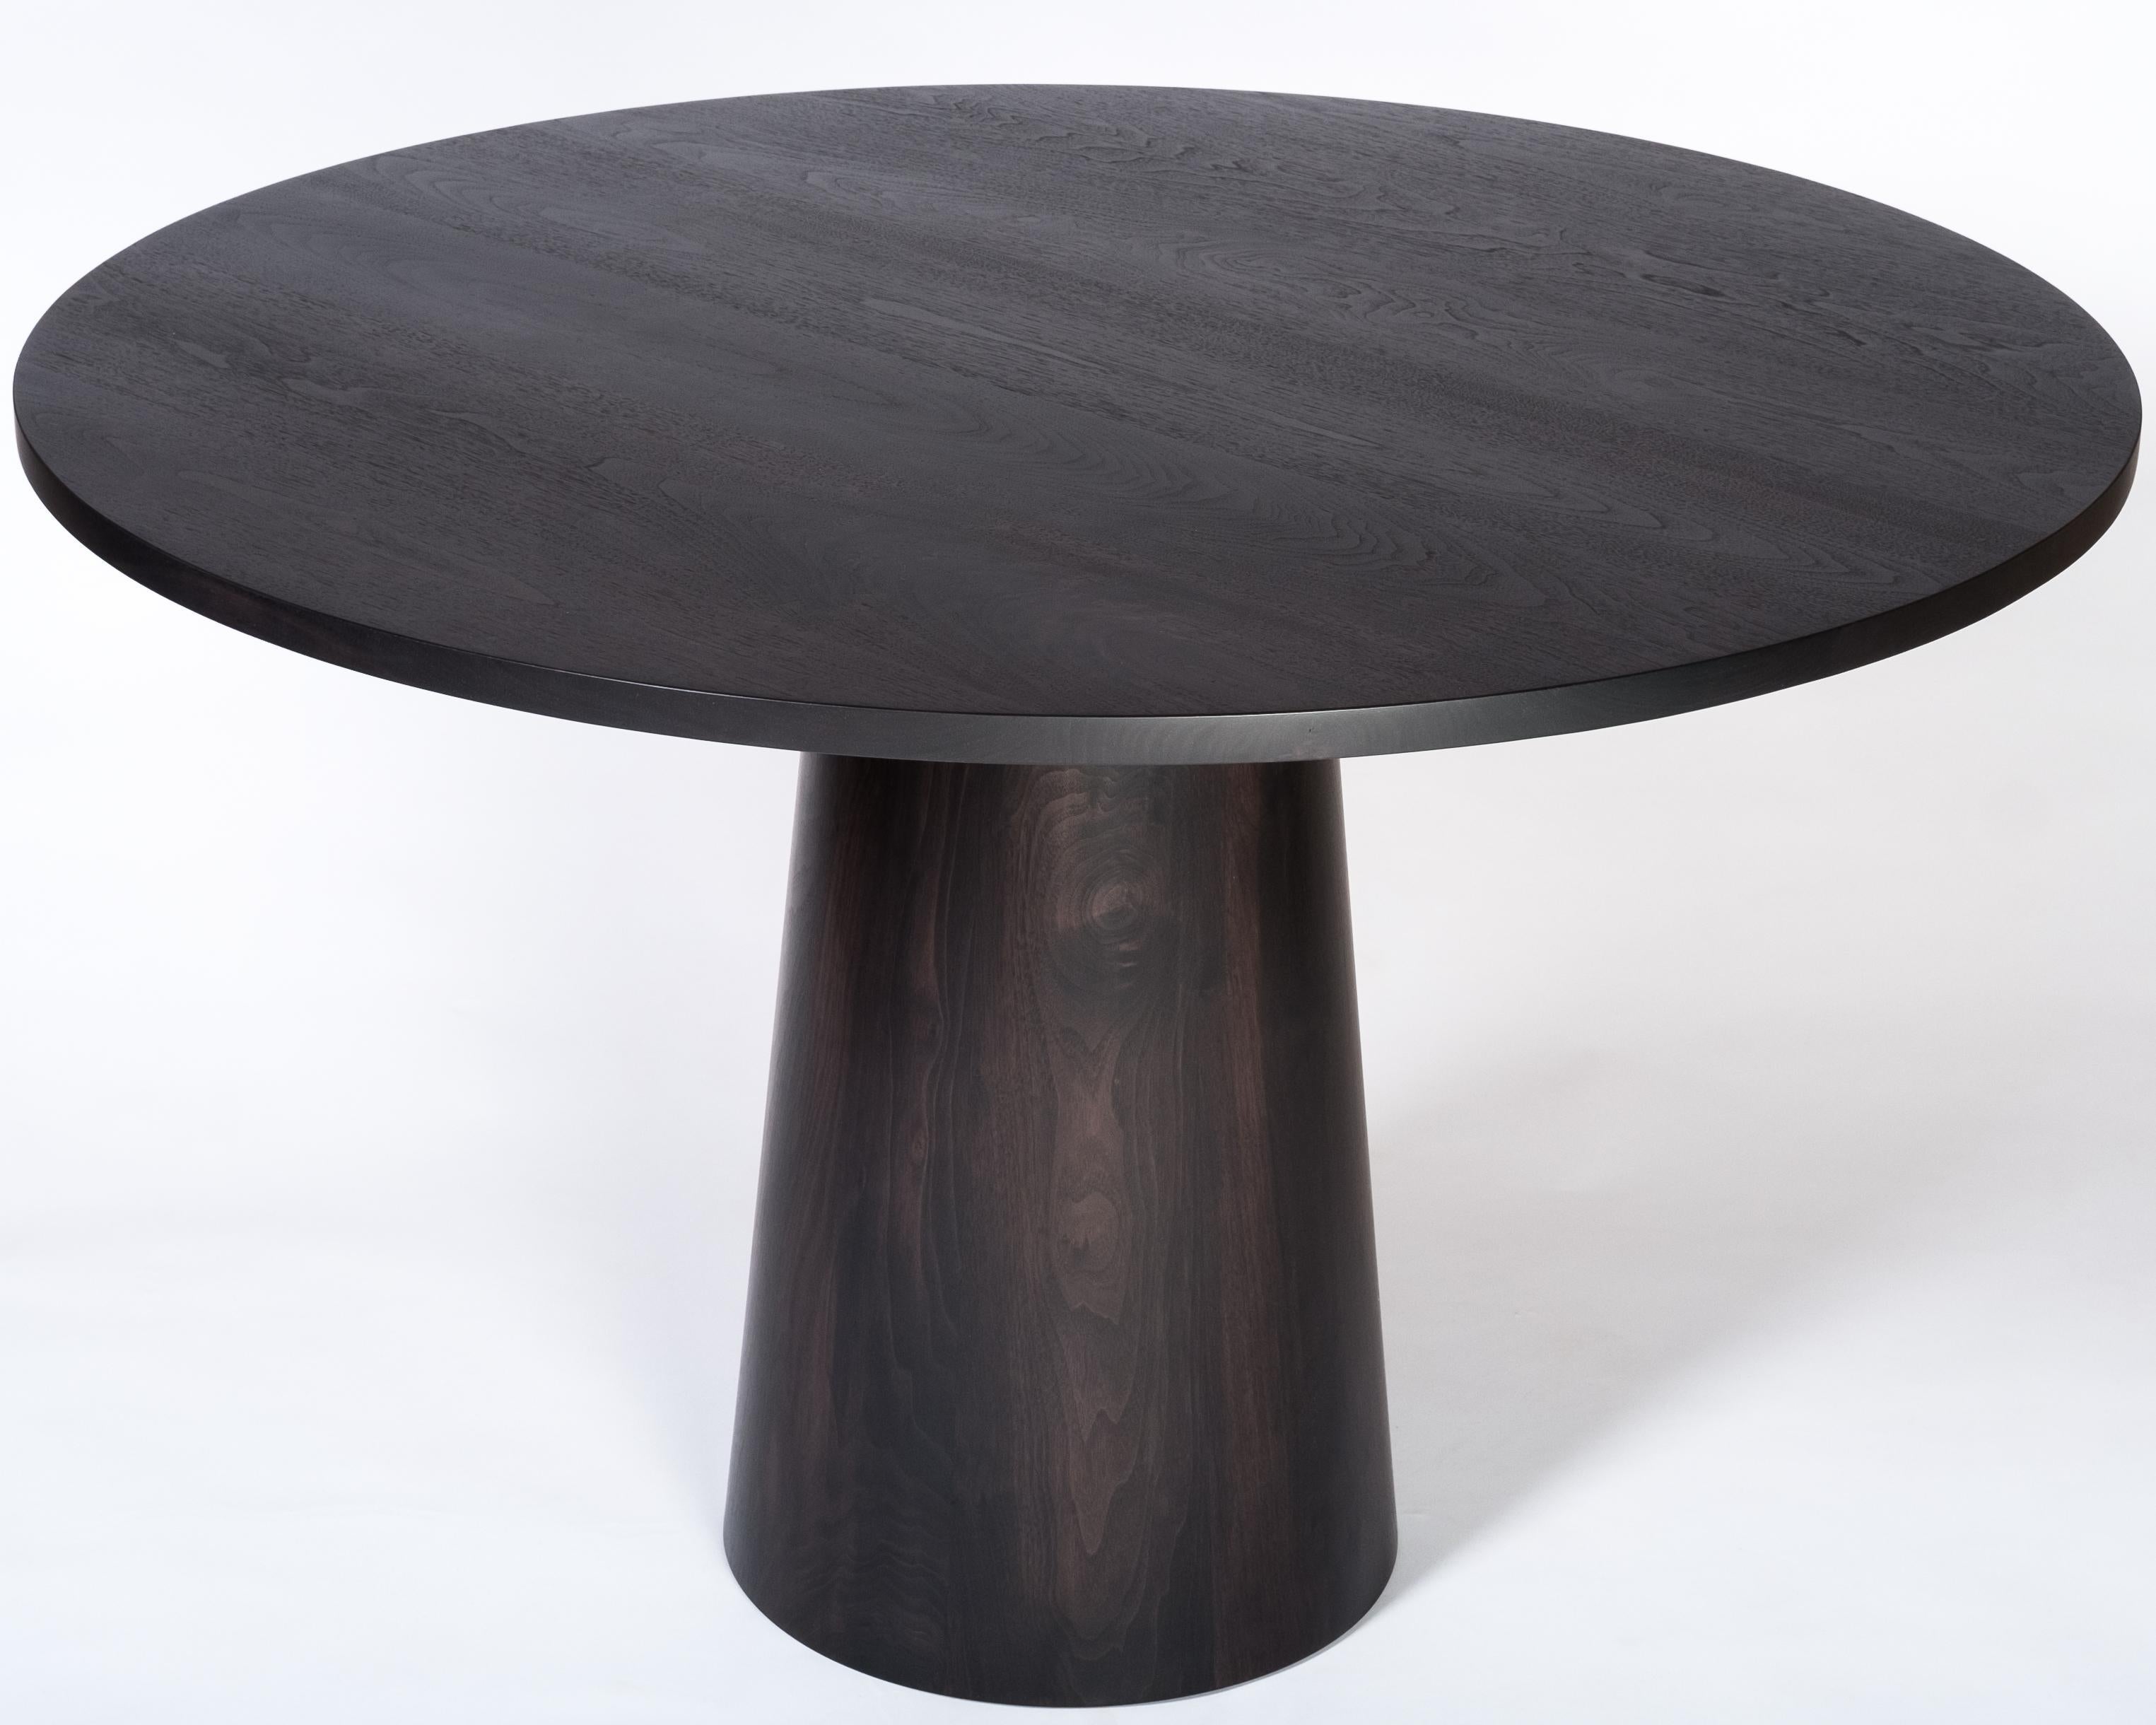 An elegant round dining table with a solid wood base and top. Photos show the table in an oxidized walnut finish which turns the table to a near black yet still allows the beautiful grain and warmth of walnut to come through. Also available in